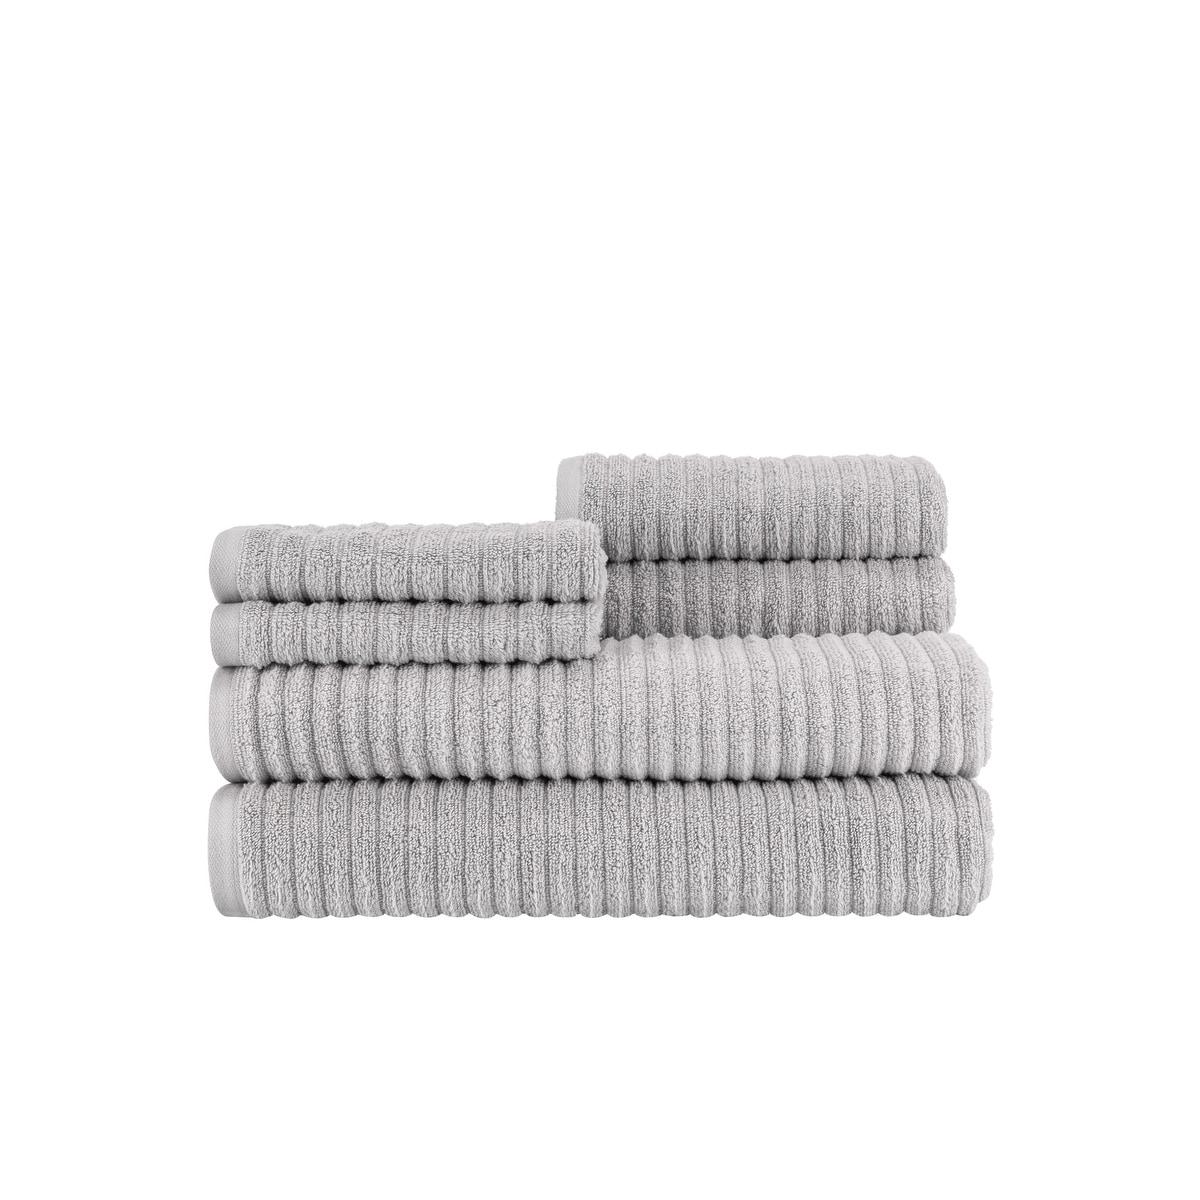 https://ak1.ostkcdn.com/images/products/is/images/direct/976a41aeed3face09c83cc1cc00e79cf0a8f1671/Caro-Home-Infinity-Rib-Towels.jpg